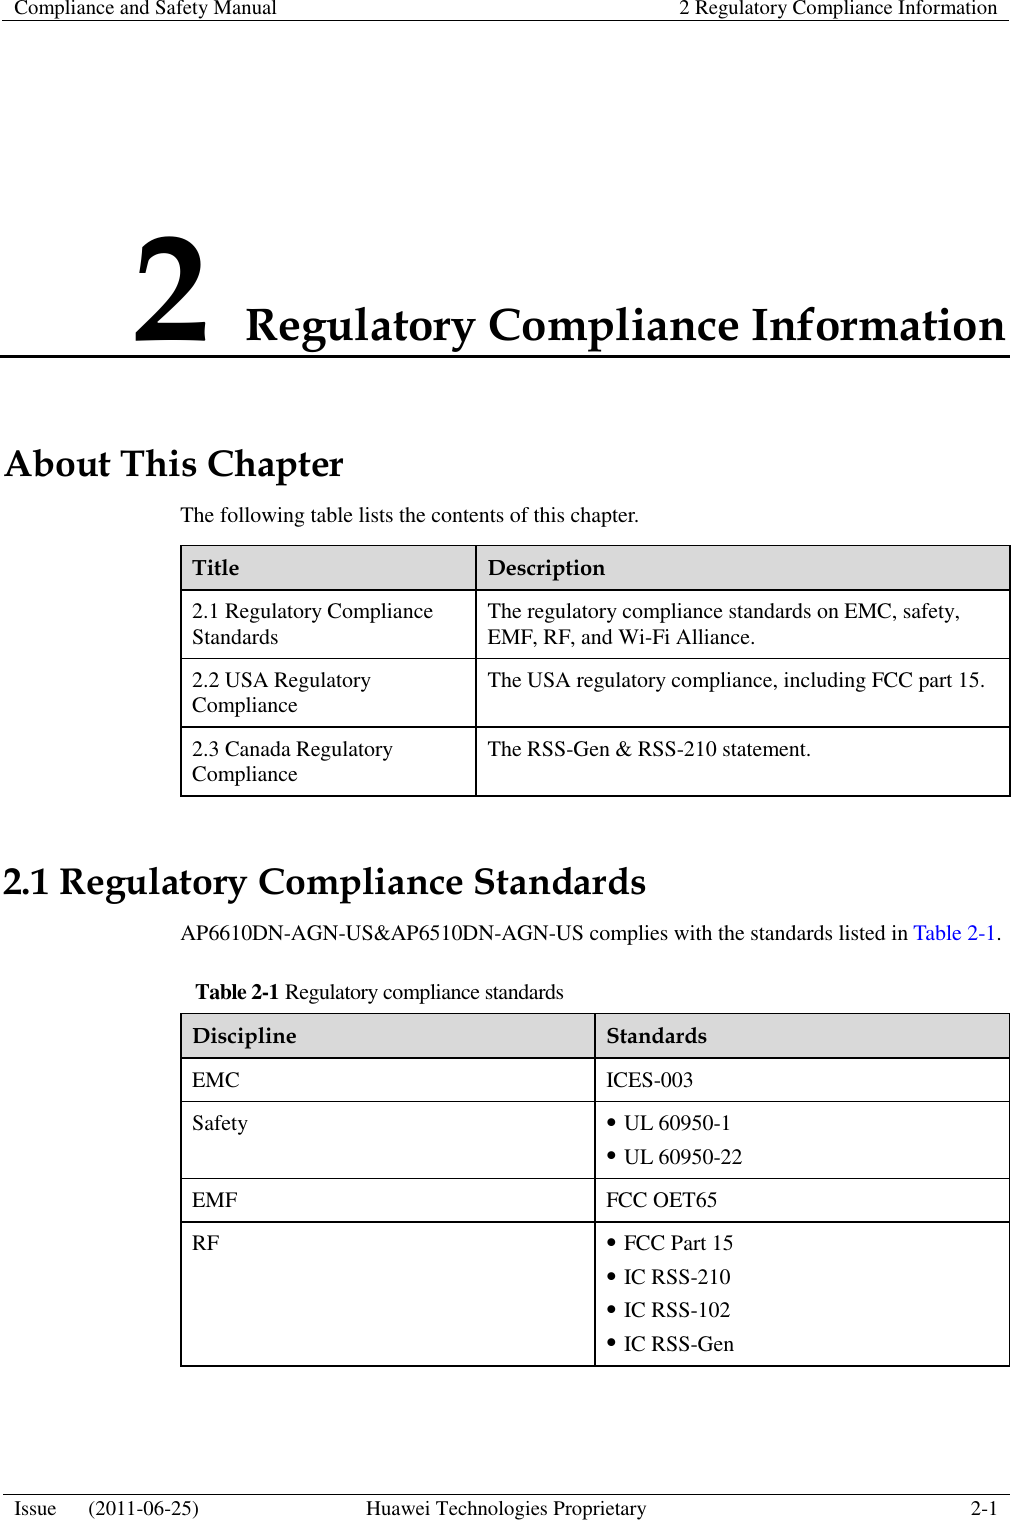 Compliance and Safety Manual 2 Regulatory Compliance Information  Issue      (2011-06-25) Huawei Technologies Proprietary 2-1  2 Regulatory Compliance Information About This Chapter The following table lists the contents of this chapter. Title Description 2.1 Regulatory Compliance Standards The regulatory compliance standards on EMC, safety, EMF, RF, and Wi-Fi Alliance. 2.2 USA Regulatory Compliance The USA regulatory compliance, including FCC part 15. 2.3 Canada Regulatory Compliance The RSS-Gen &amp; RSS-210 statement. 2.1 Regulatory Compliance Standards AP6610DN-AGN-US&amp;AP6510DN-AGN-US complies with the standards listed in Table 2-1. Table 2-1 Regulatory compliance standards Discipline Standards EMC ICES-003 Safety  UL 60950-1  UL 60950-22 EMF FCC OET65 RF  FCC Part 15  IC RSS-210  IC RSS-102  IC RSS-Gen 